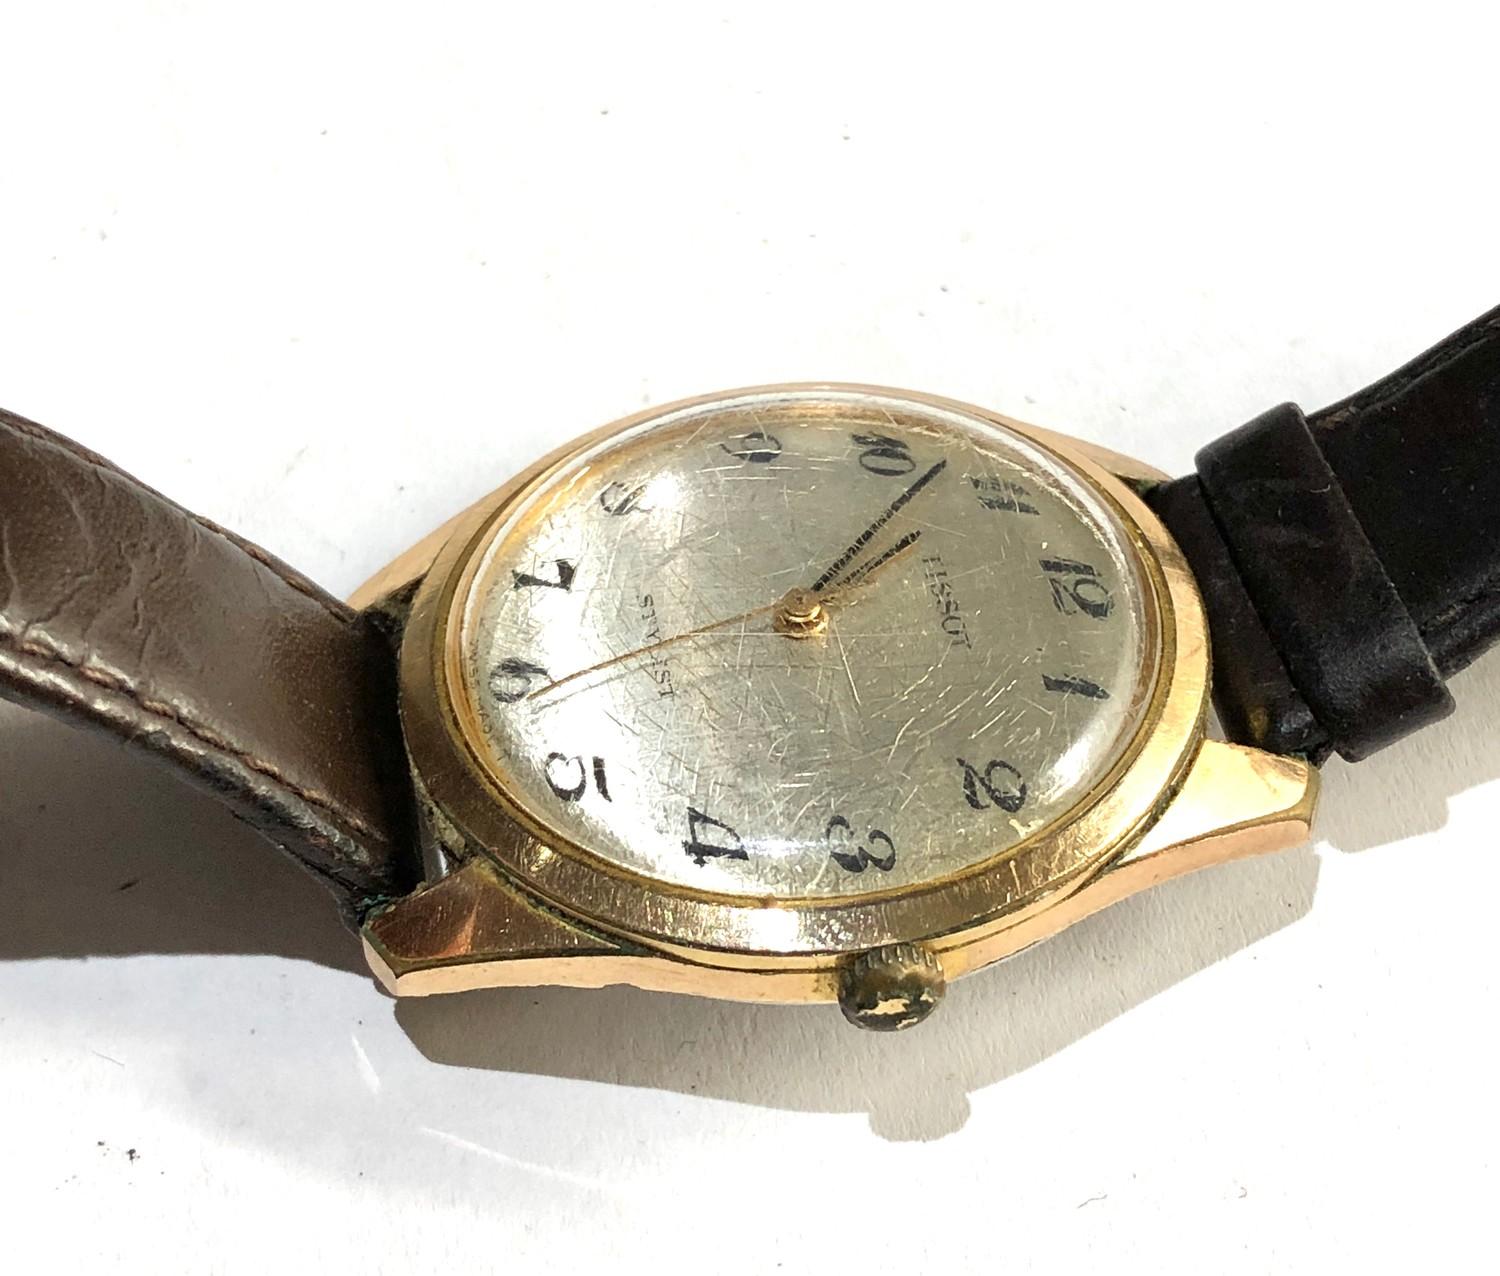 Vintage gents Tissot stylist wristwatch manual wind watch it winds and ticks but no warranty given - Image 2 of 3